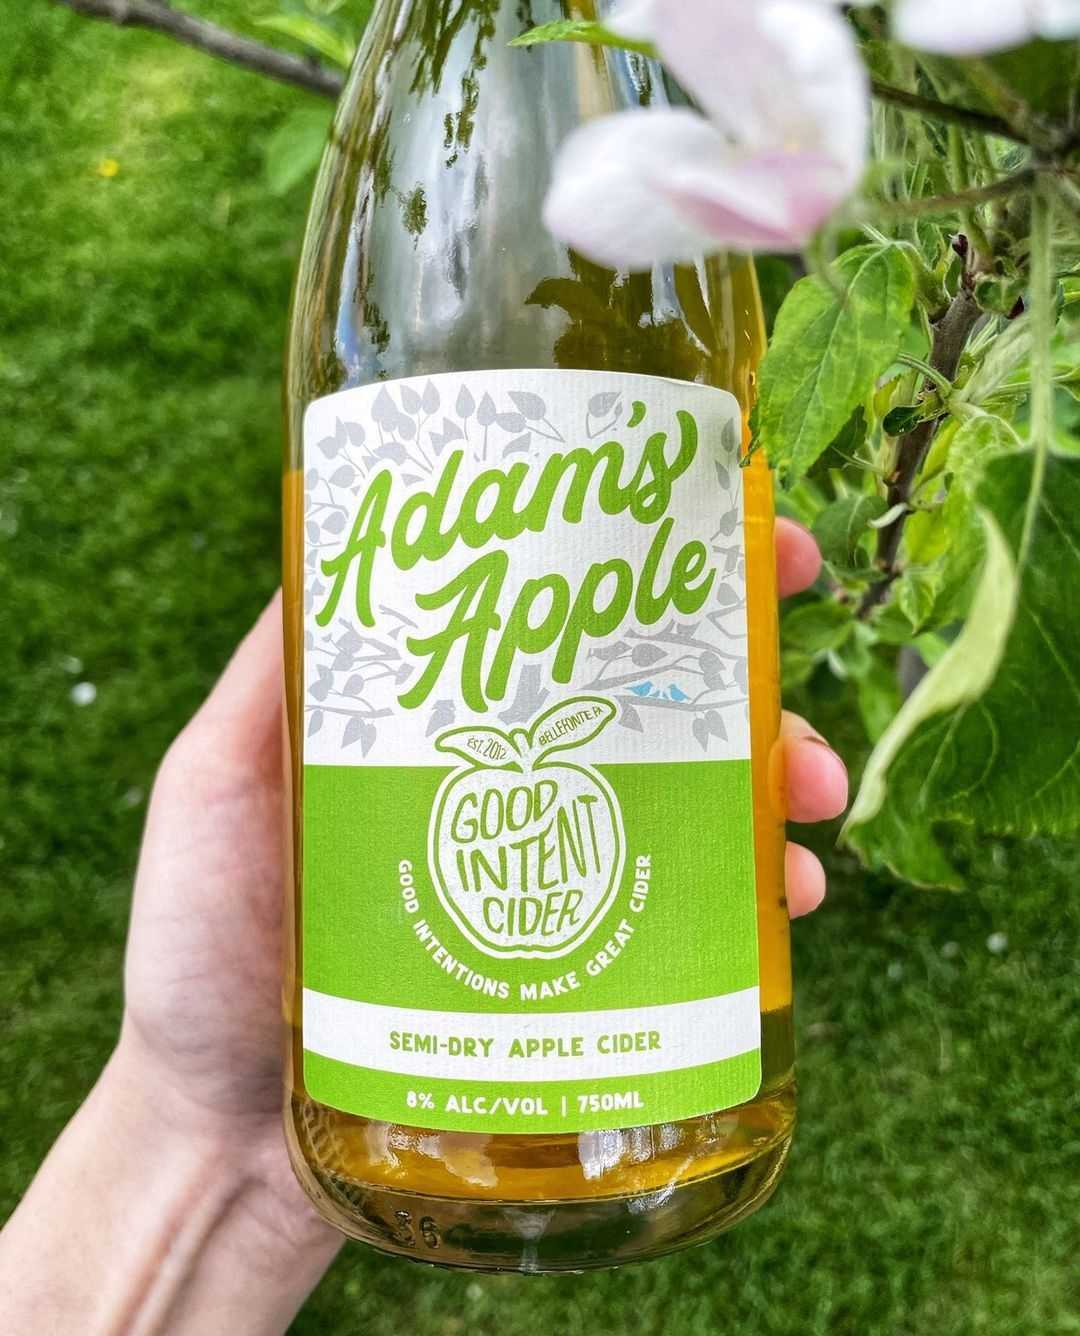 #HVAgventures destination @goodintentcider is a family owned and operated cidery located in the heart of Pennsylvania apple country. They strive to make the best cider and set themselves apart by adding no water and very little sweetness to the ciders.
G